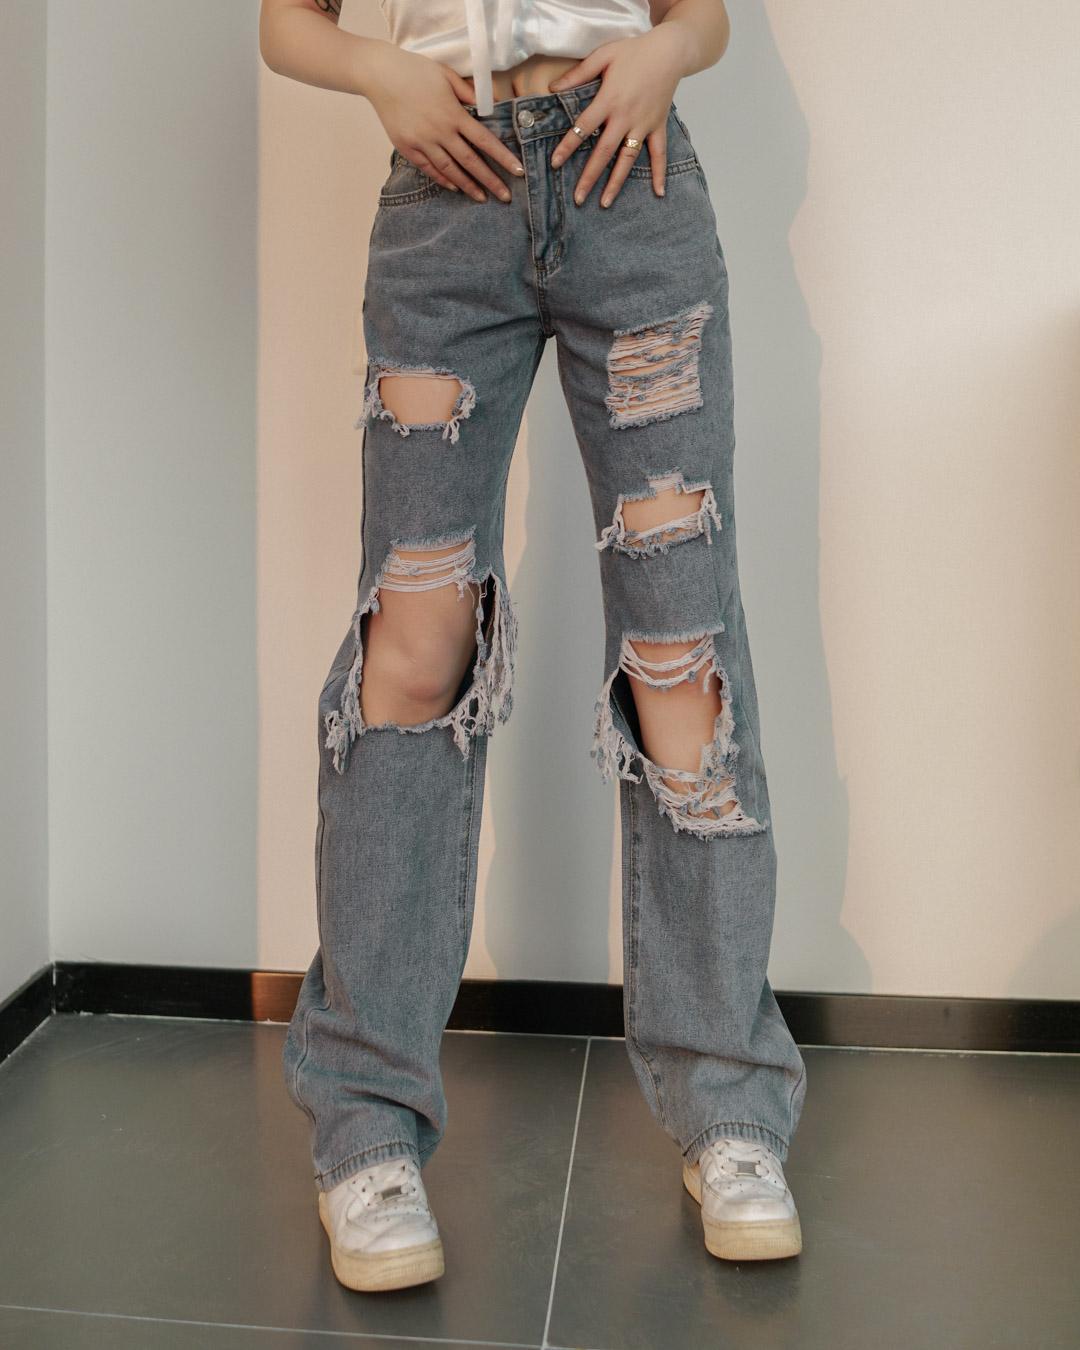 Mid-rise Distressed Jeans